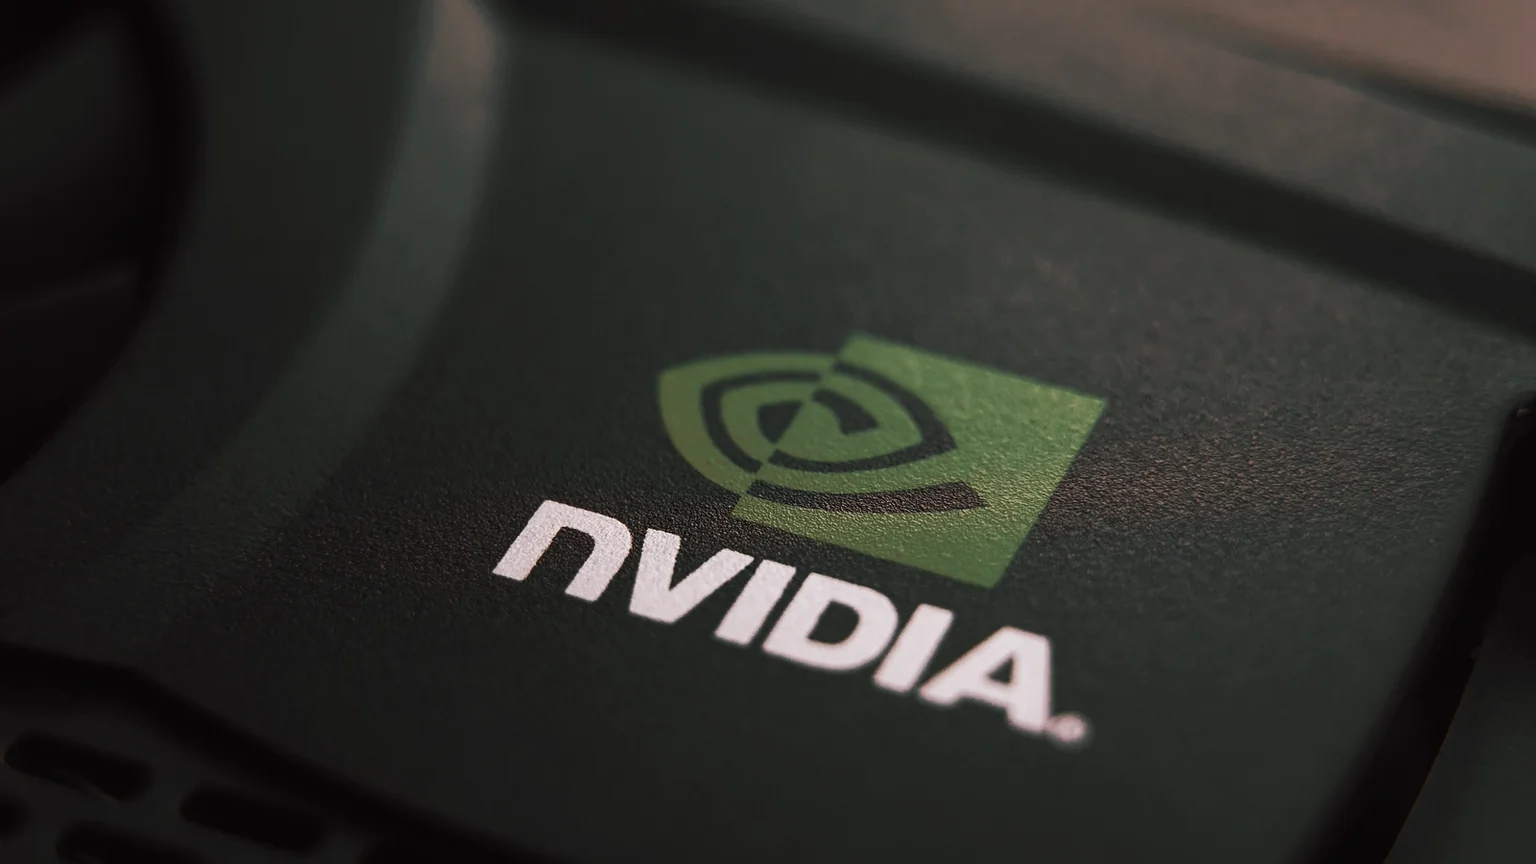 NVIDIA is one of the world's leading graphic chip producers. Image: Shutterstock